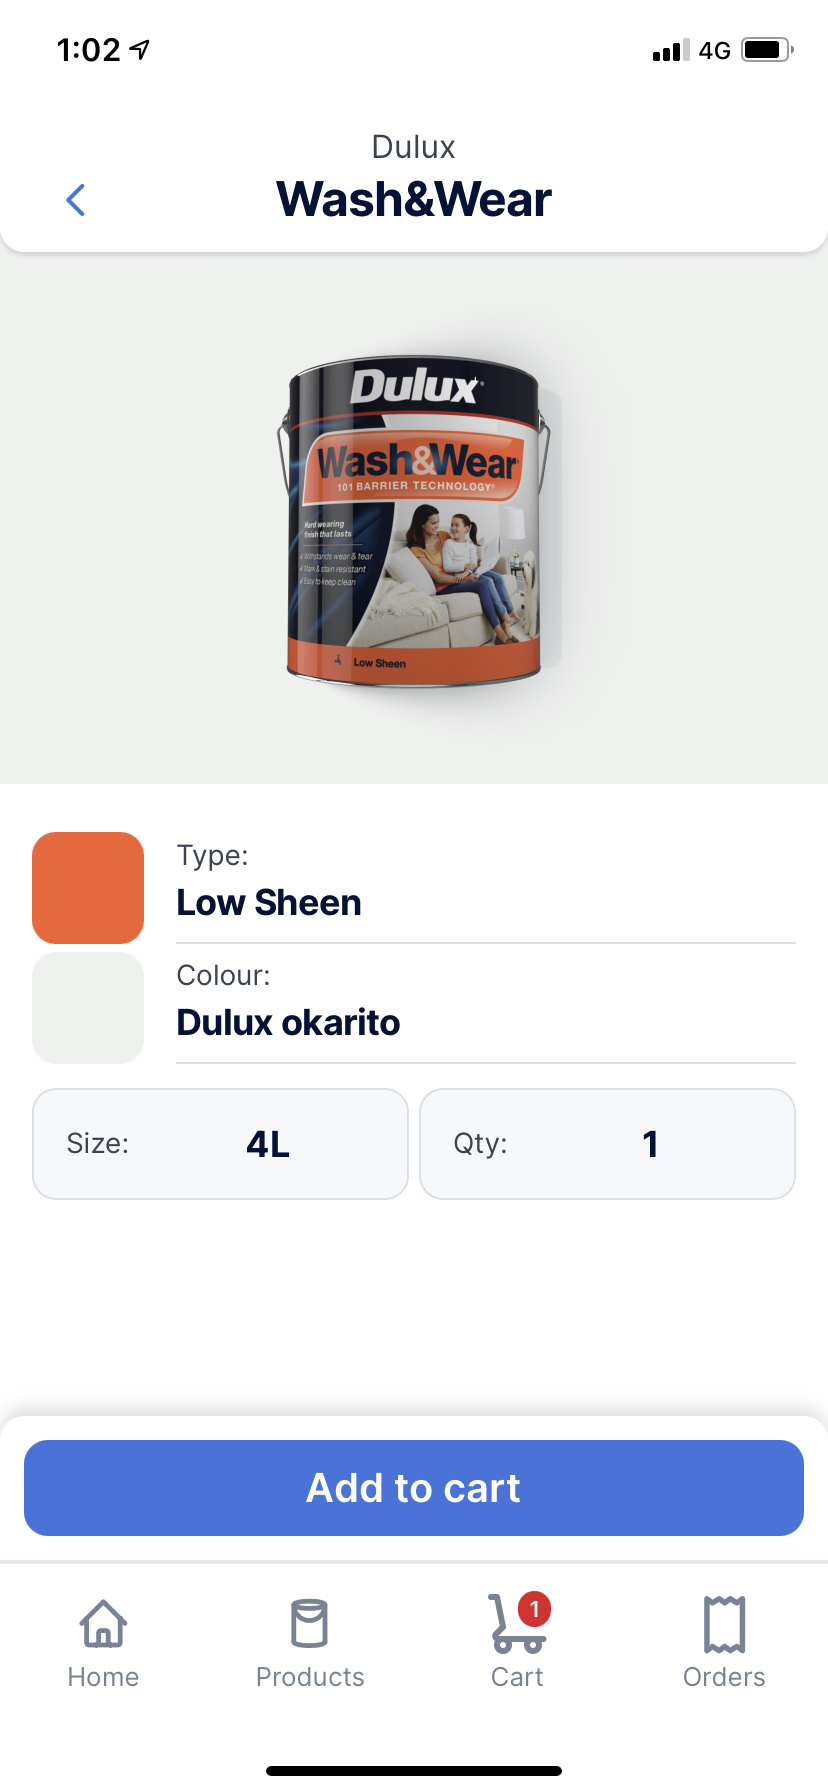 A screenshot of the Trade Direct app with Wash&Wear displayed